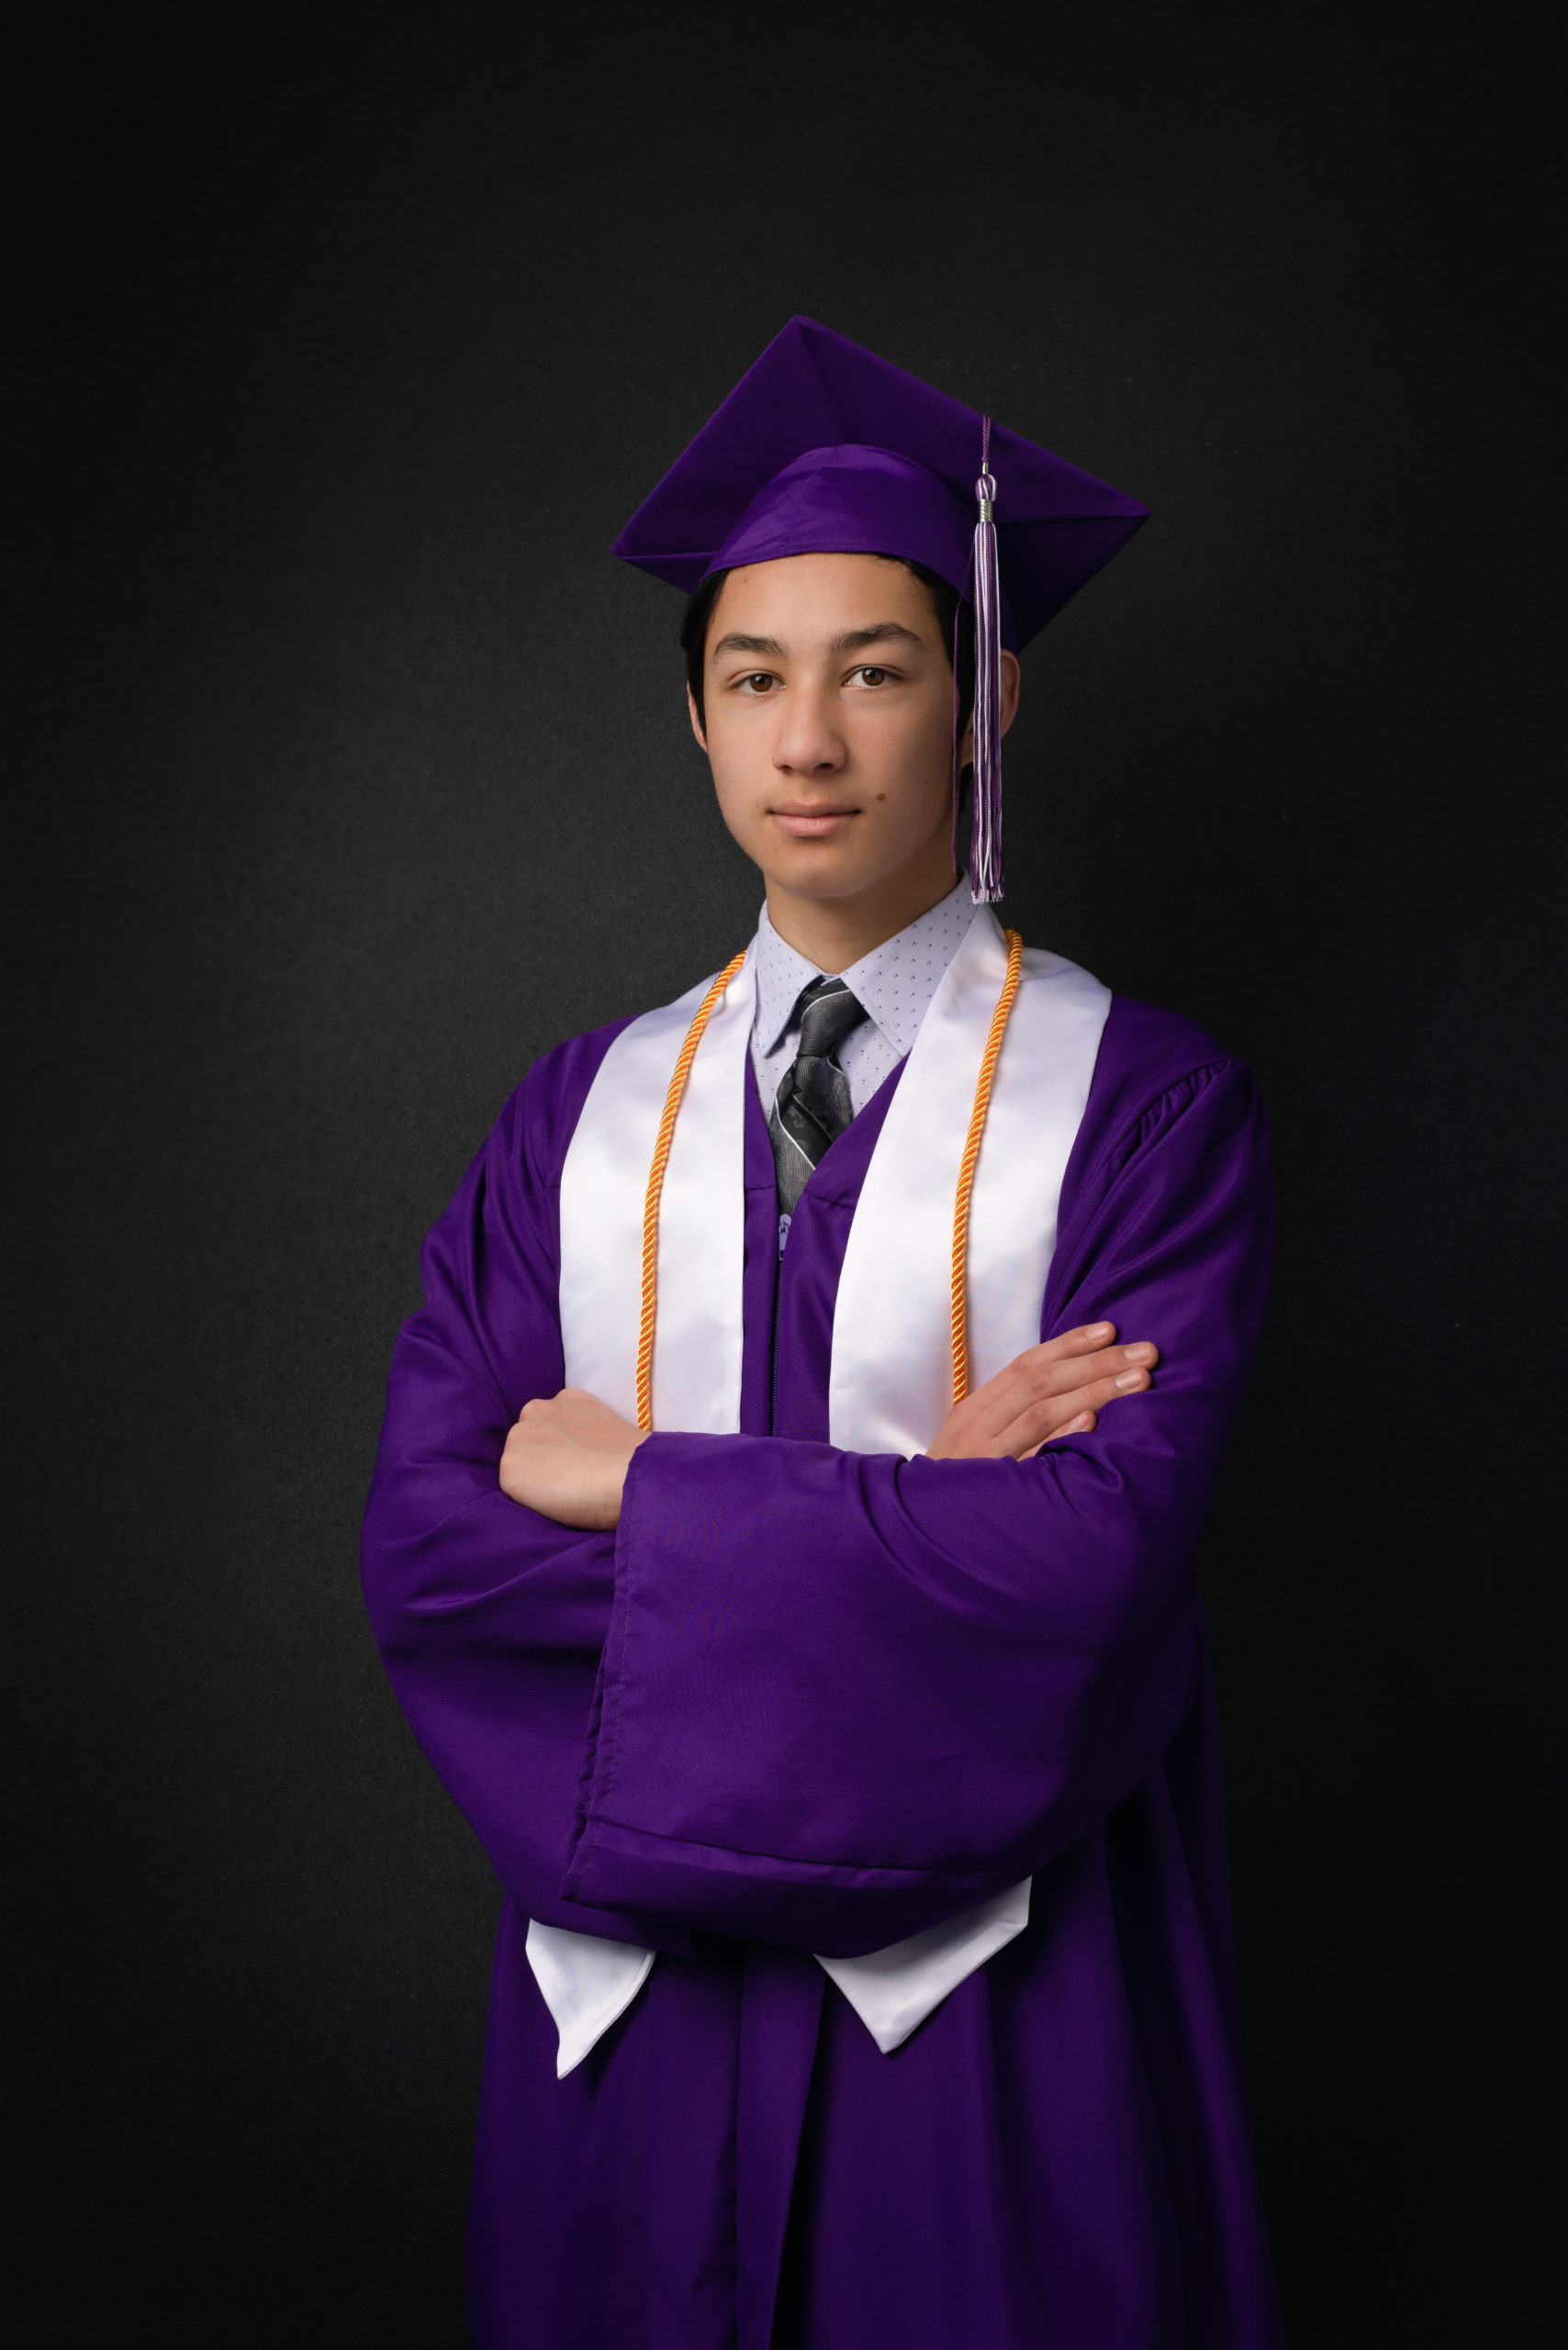 Graduating student with cap and gown